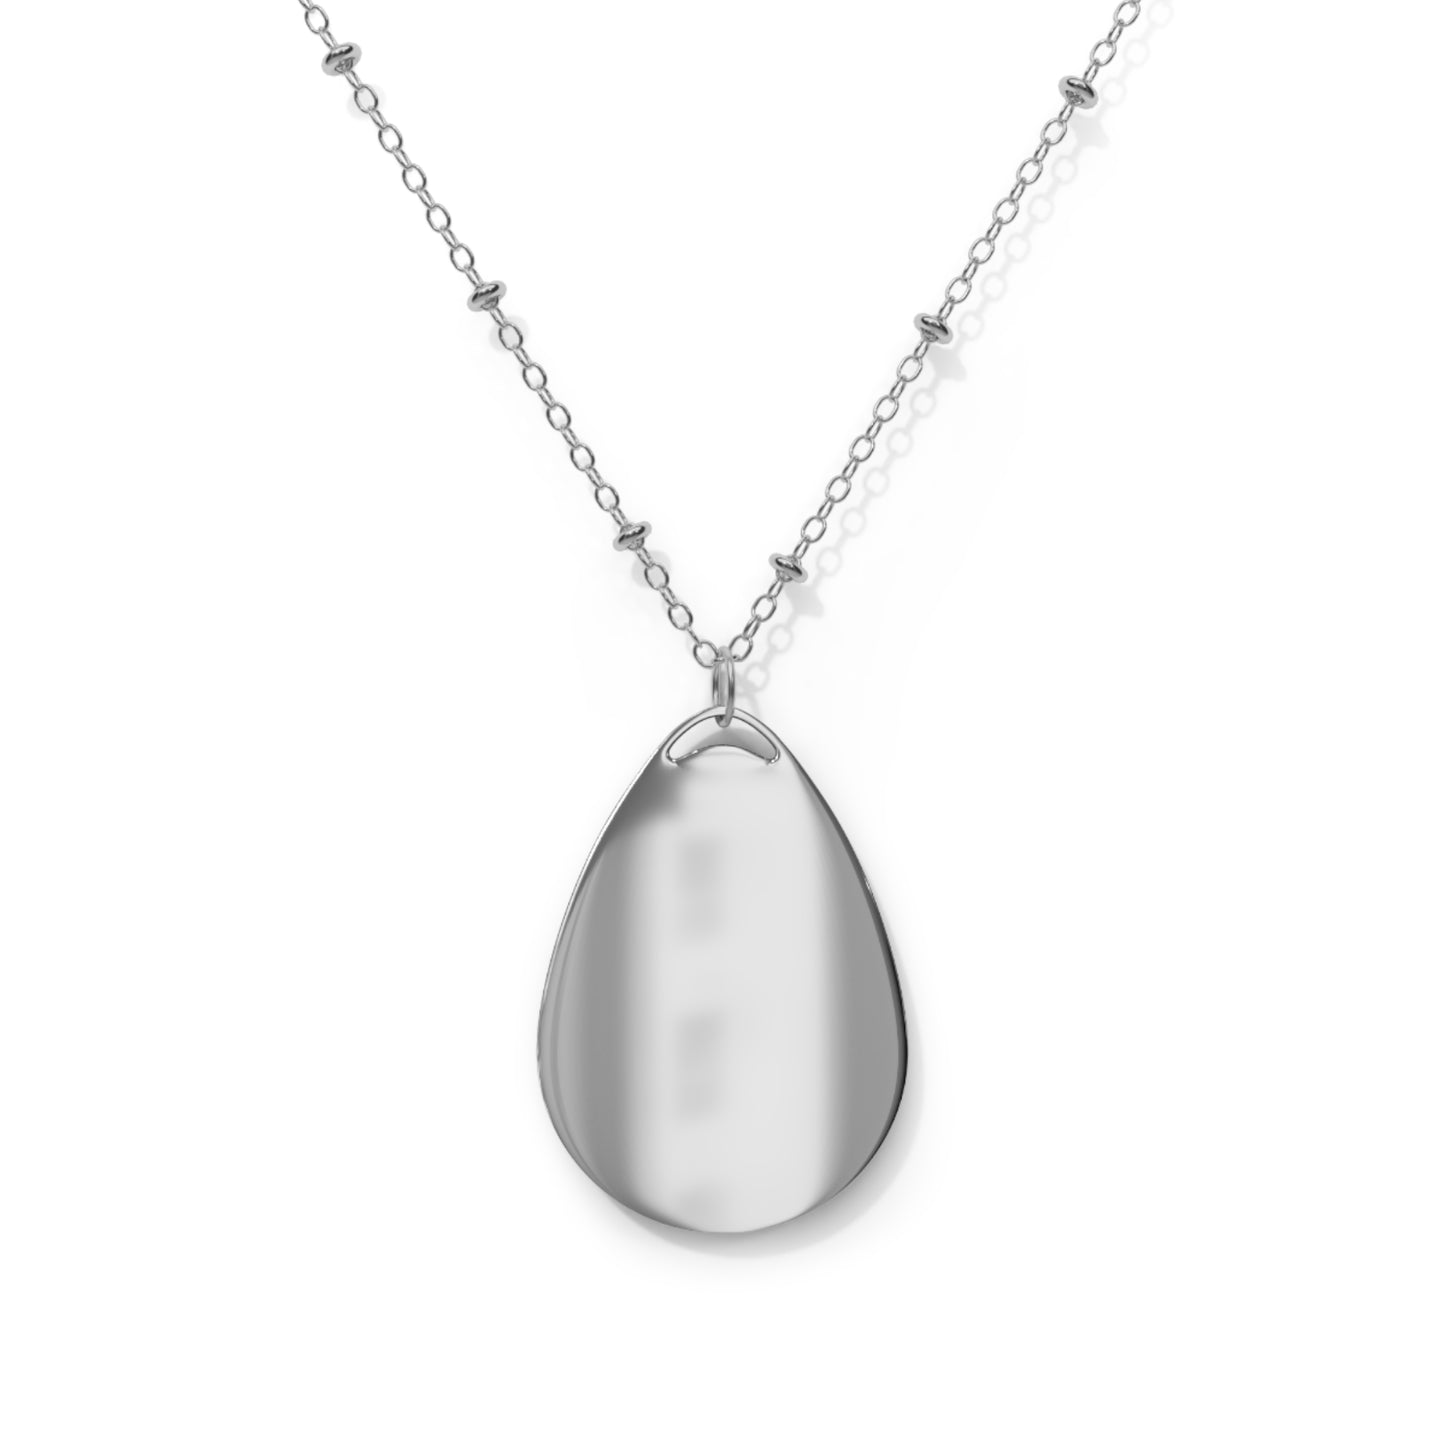 Crossfade Oval Necklace